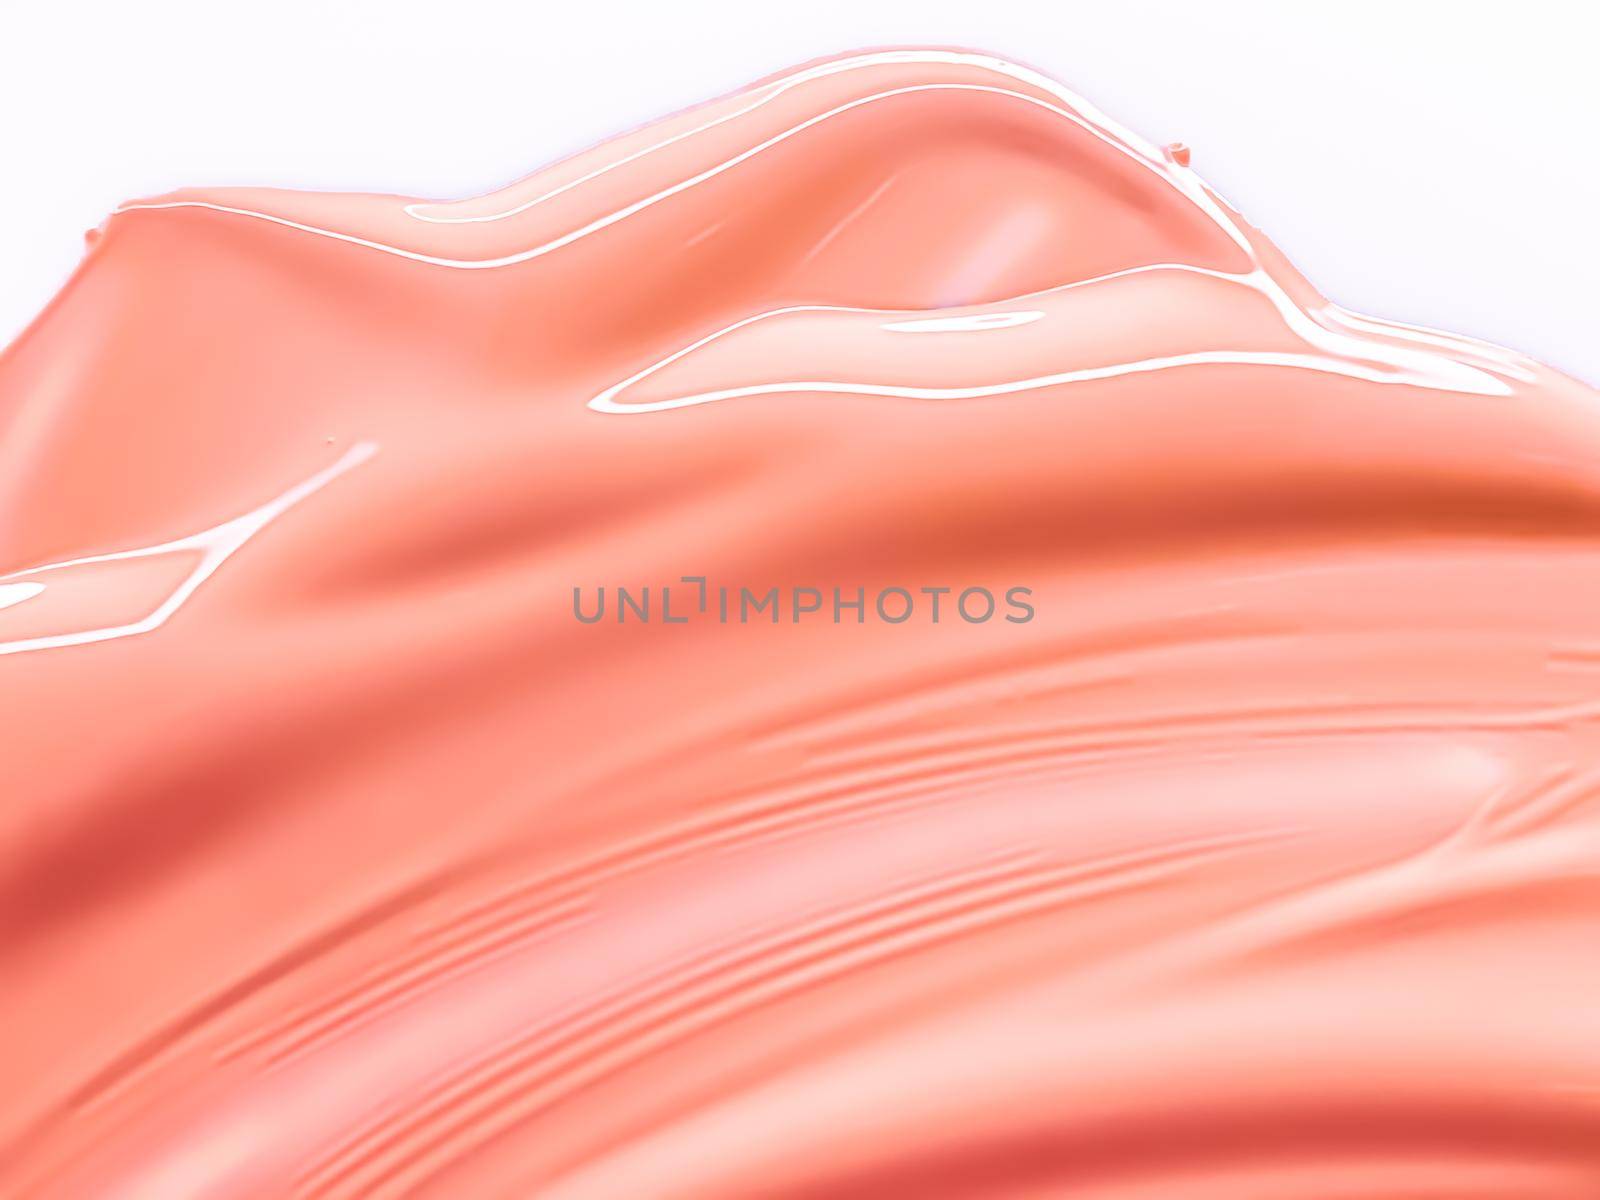 Glossy coral cosmetic texture as beauty make-up product background, skincare cosmetics and luxury makeup brand design concept